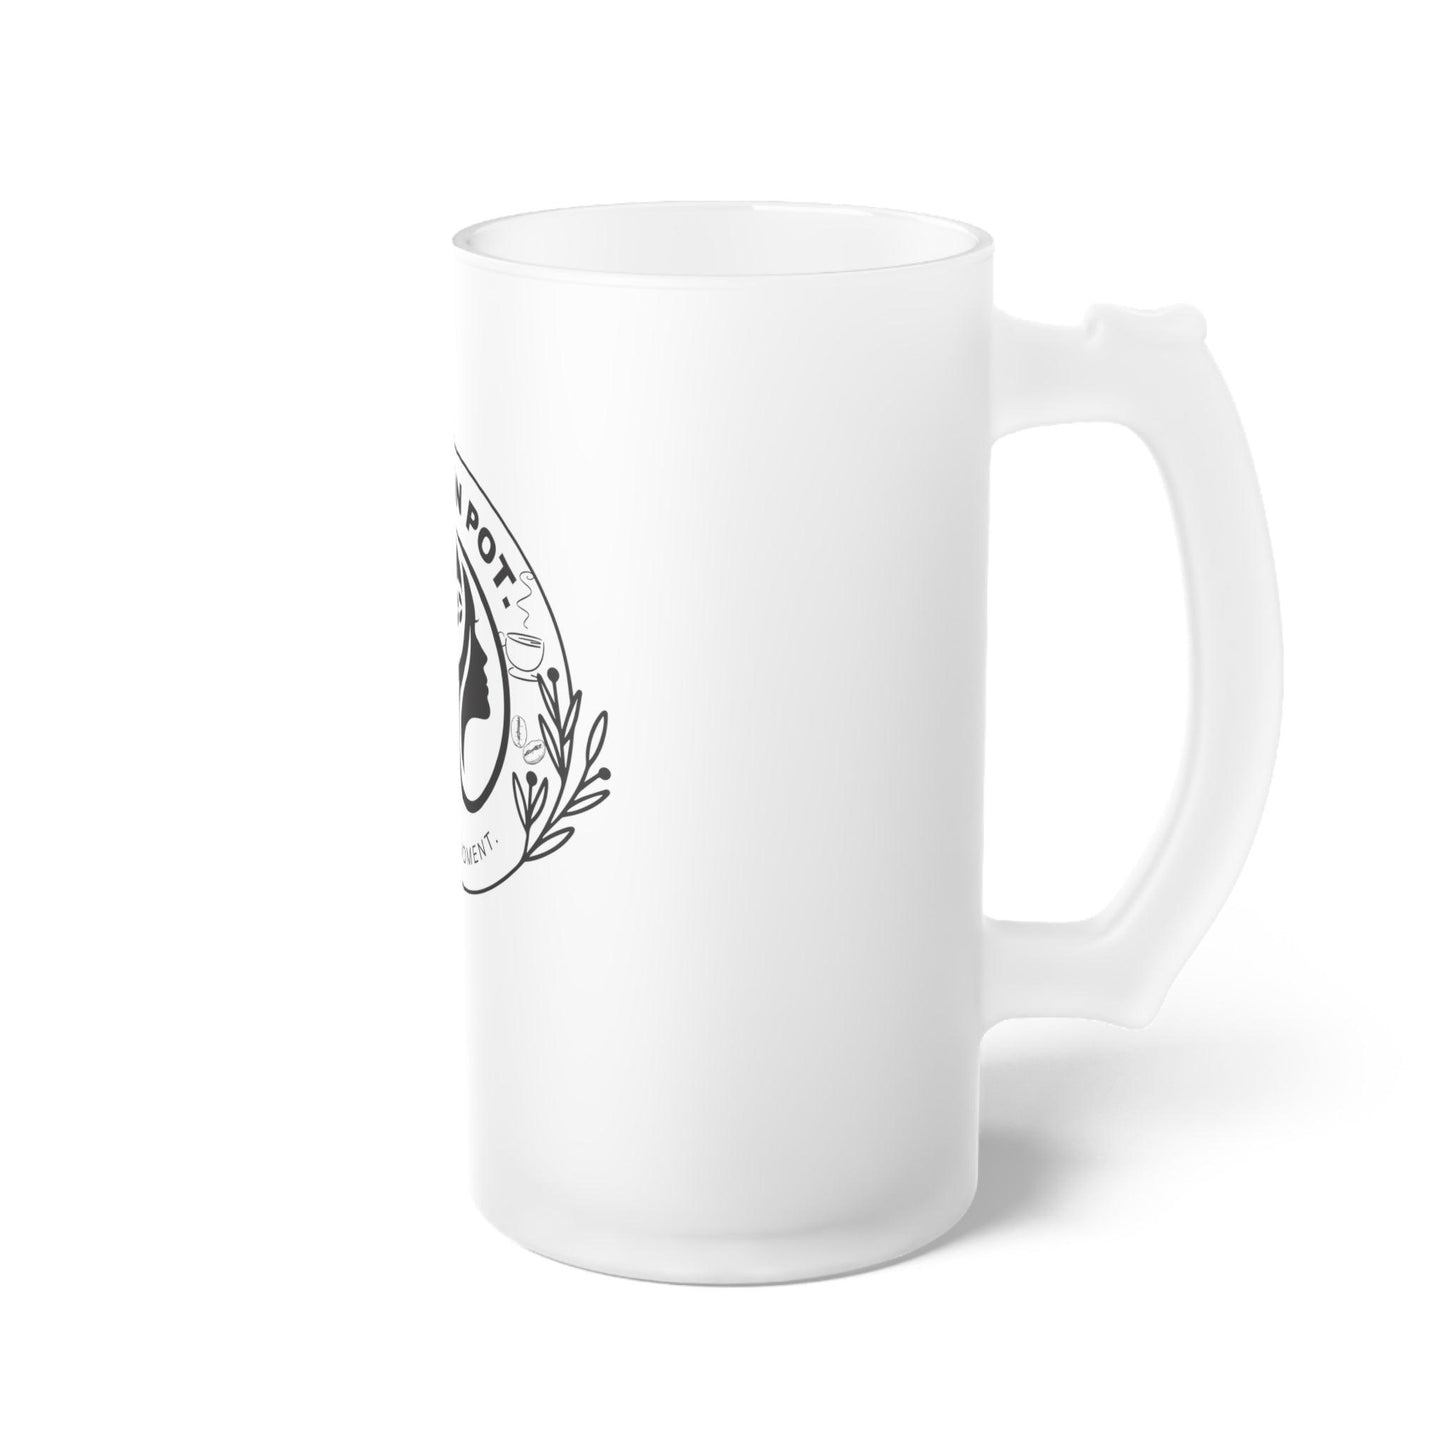 High on Coffee Frosted Glass Latte Mug - COFFEEBRE